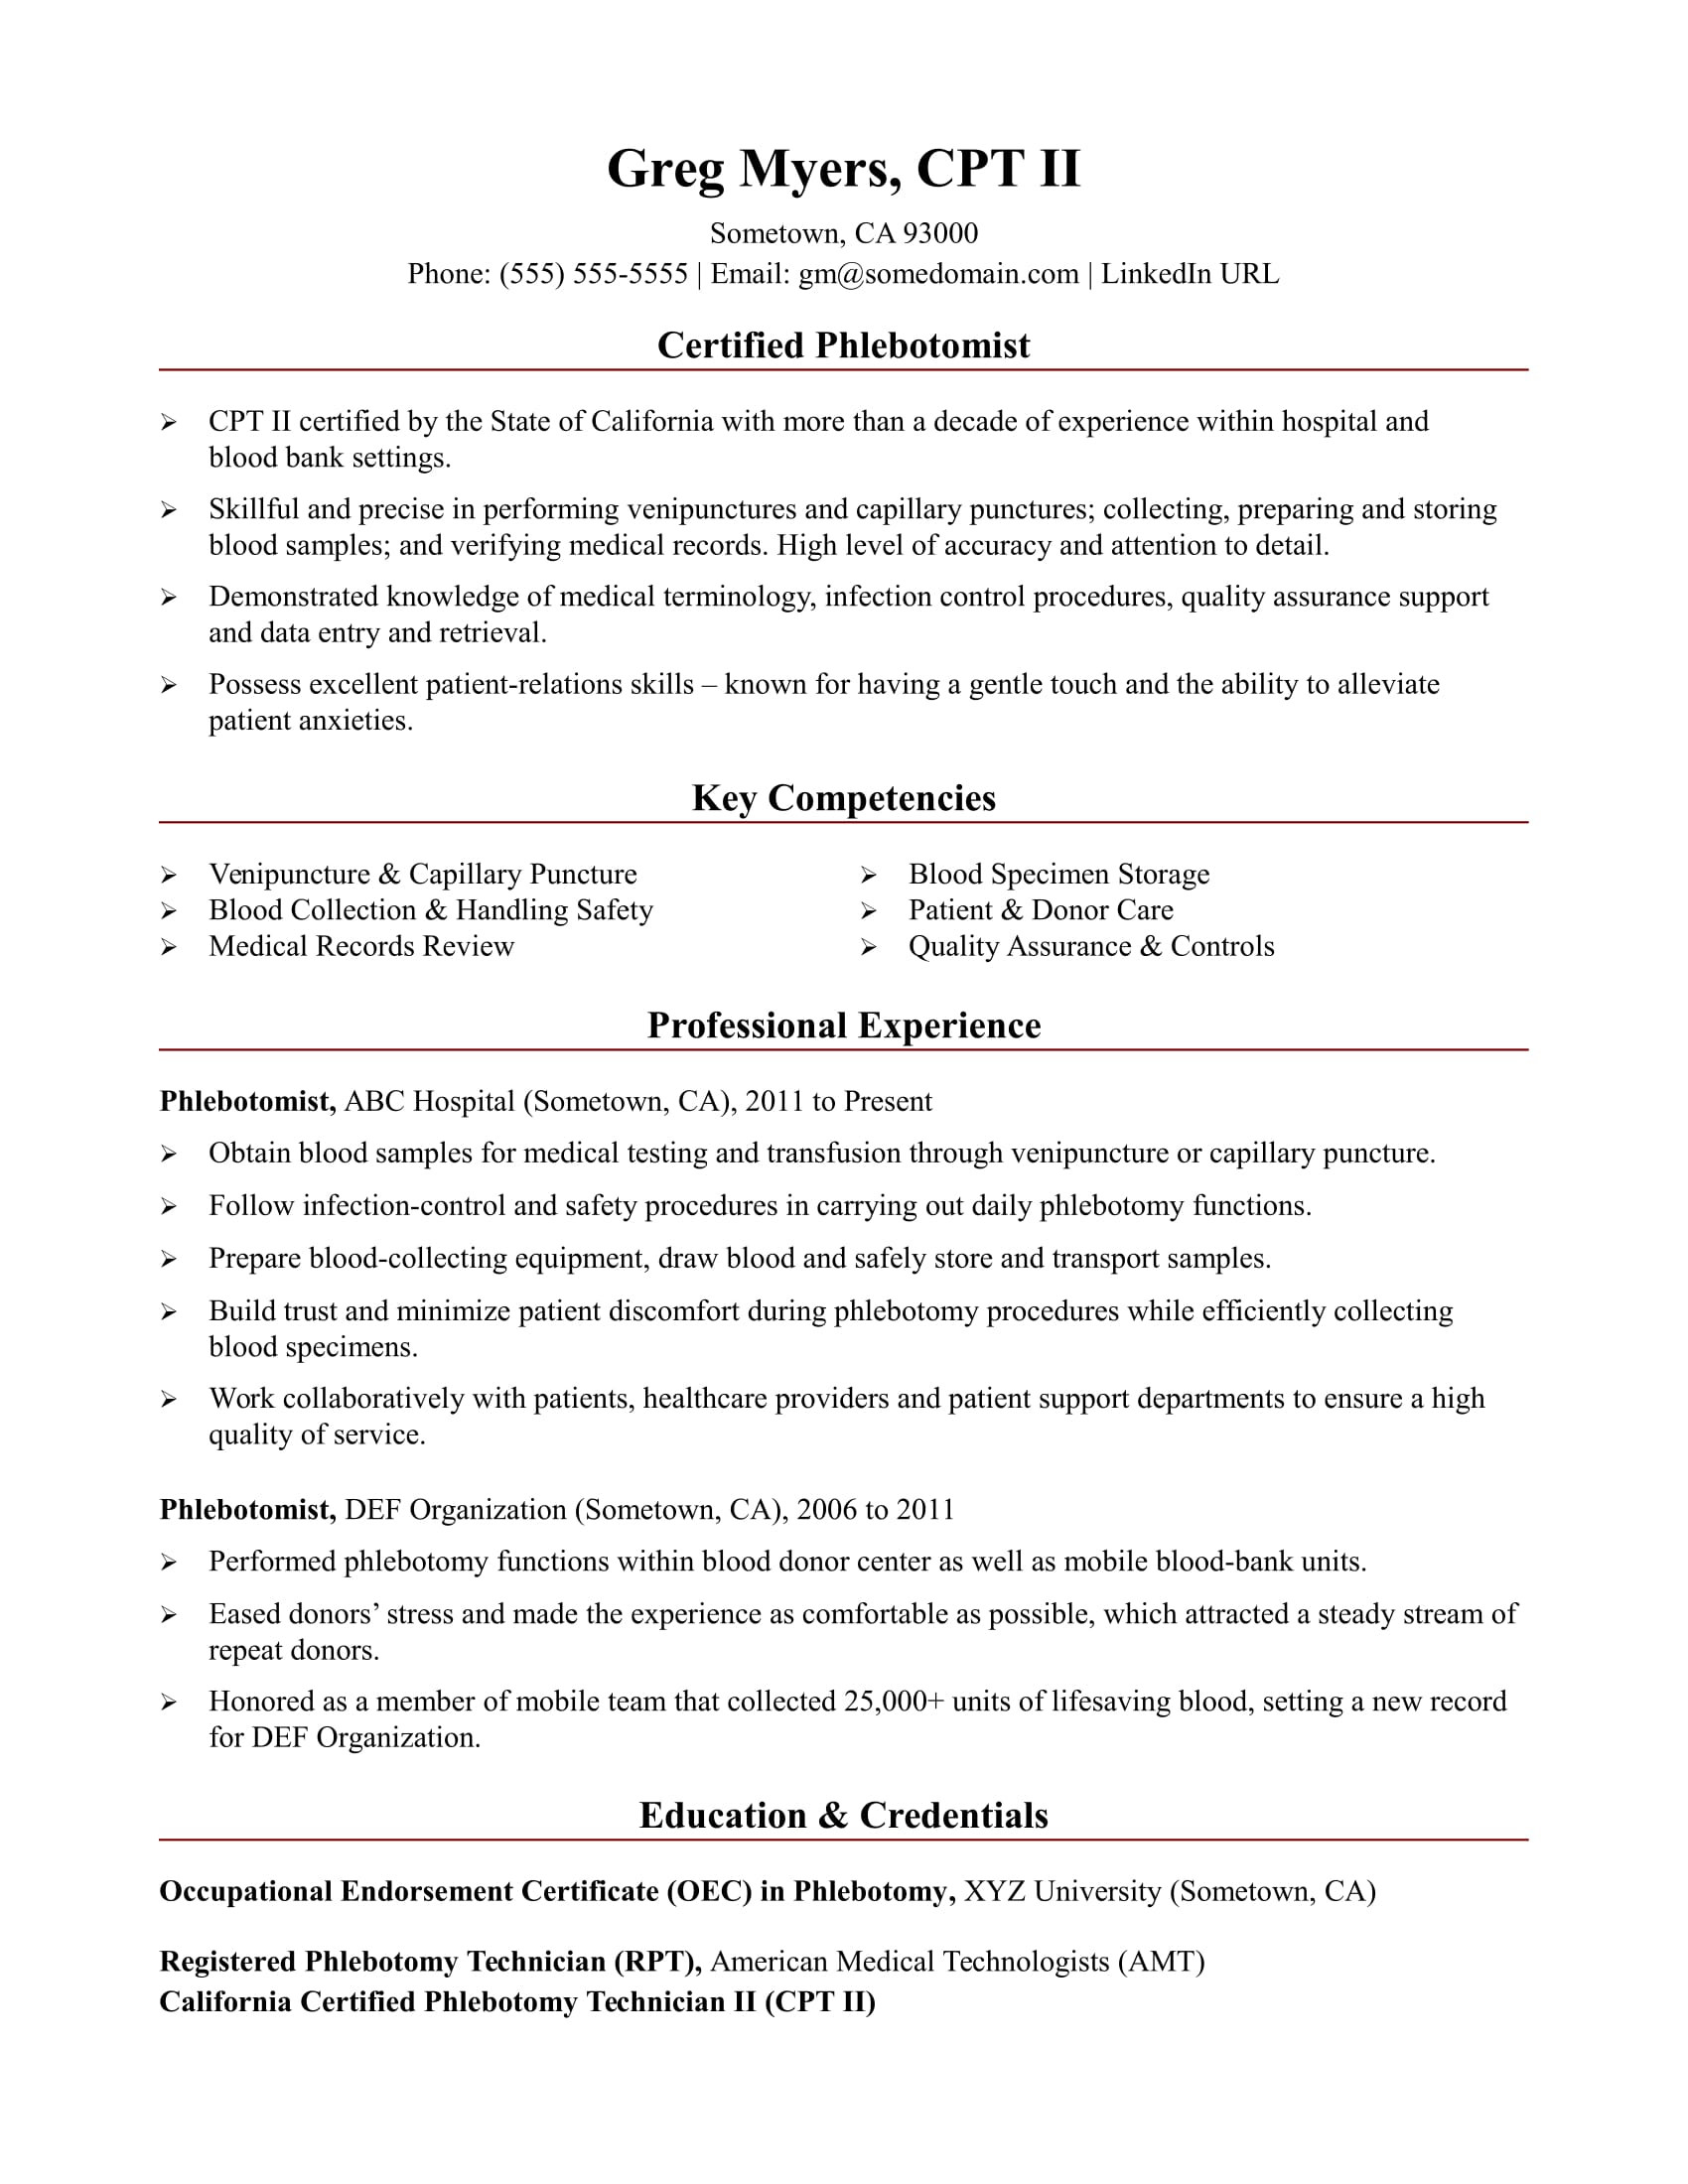 Sample Resume for Phlebotomy with No Experience Phlebotomist Resume Sample Monster.com